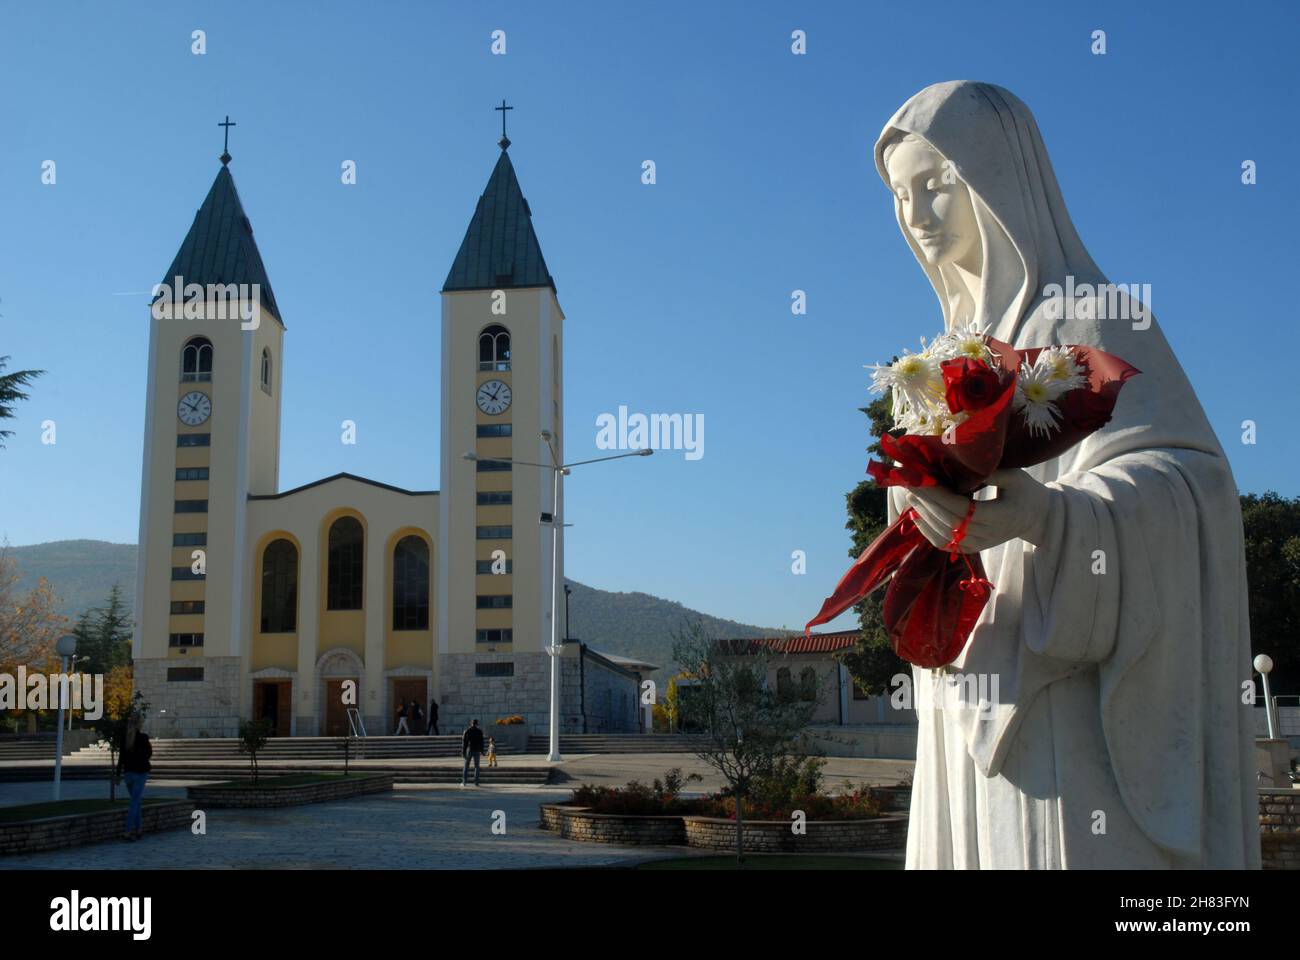 Statue of Virgin Mary, Queen of Peace, in front of Medjugorje Catholic Church, Medjugorje, Bosnia and Herzegovina. Stock Photo